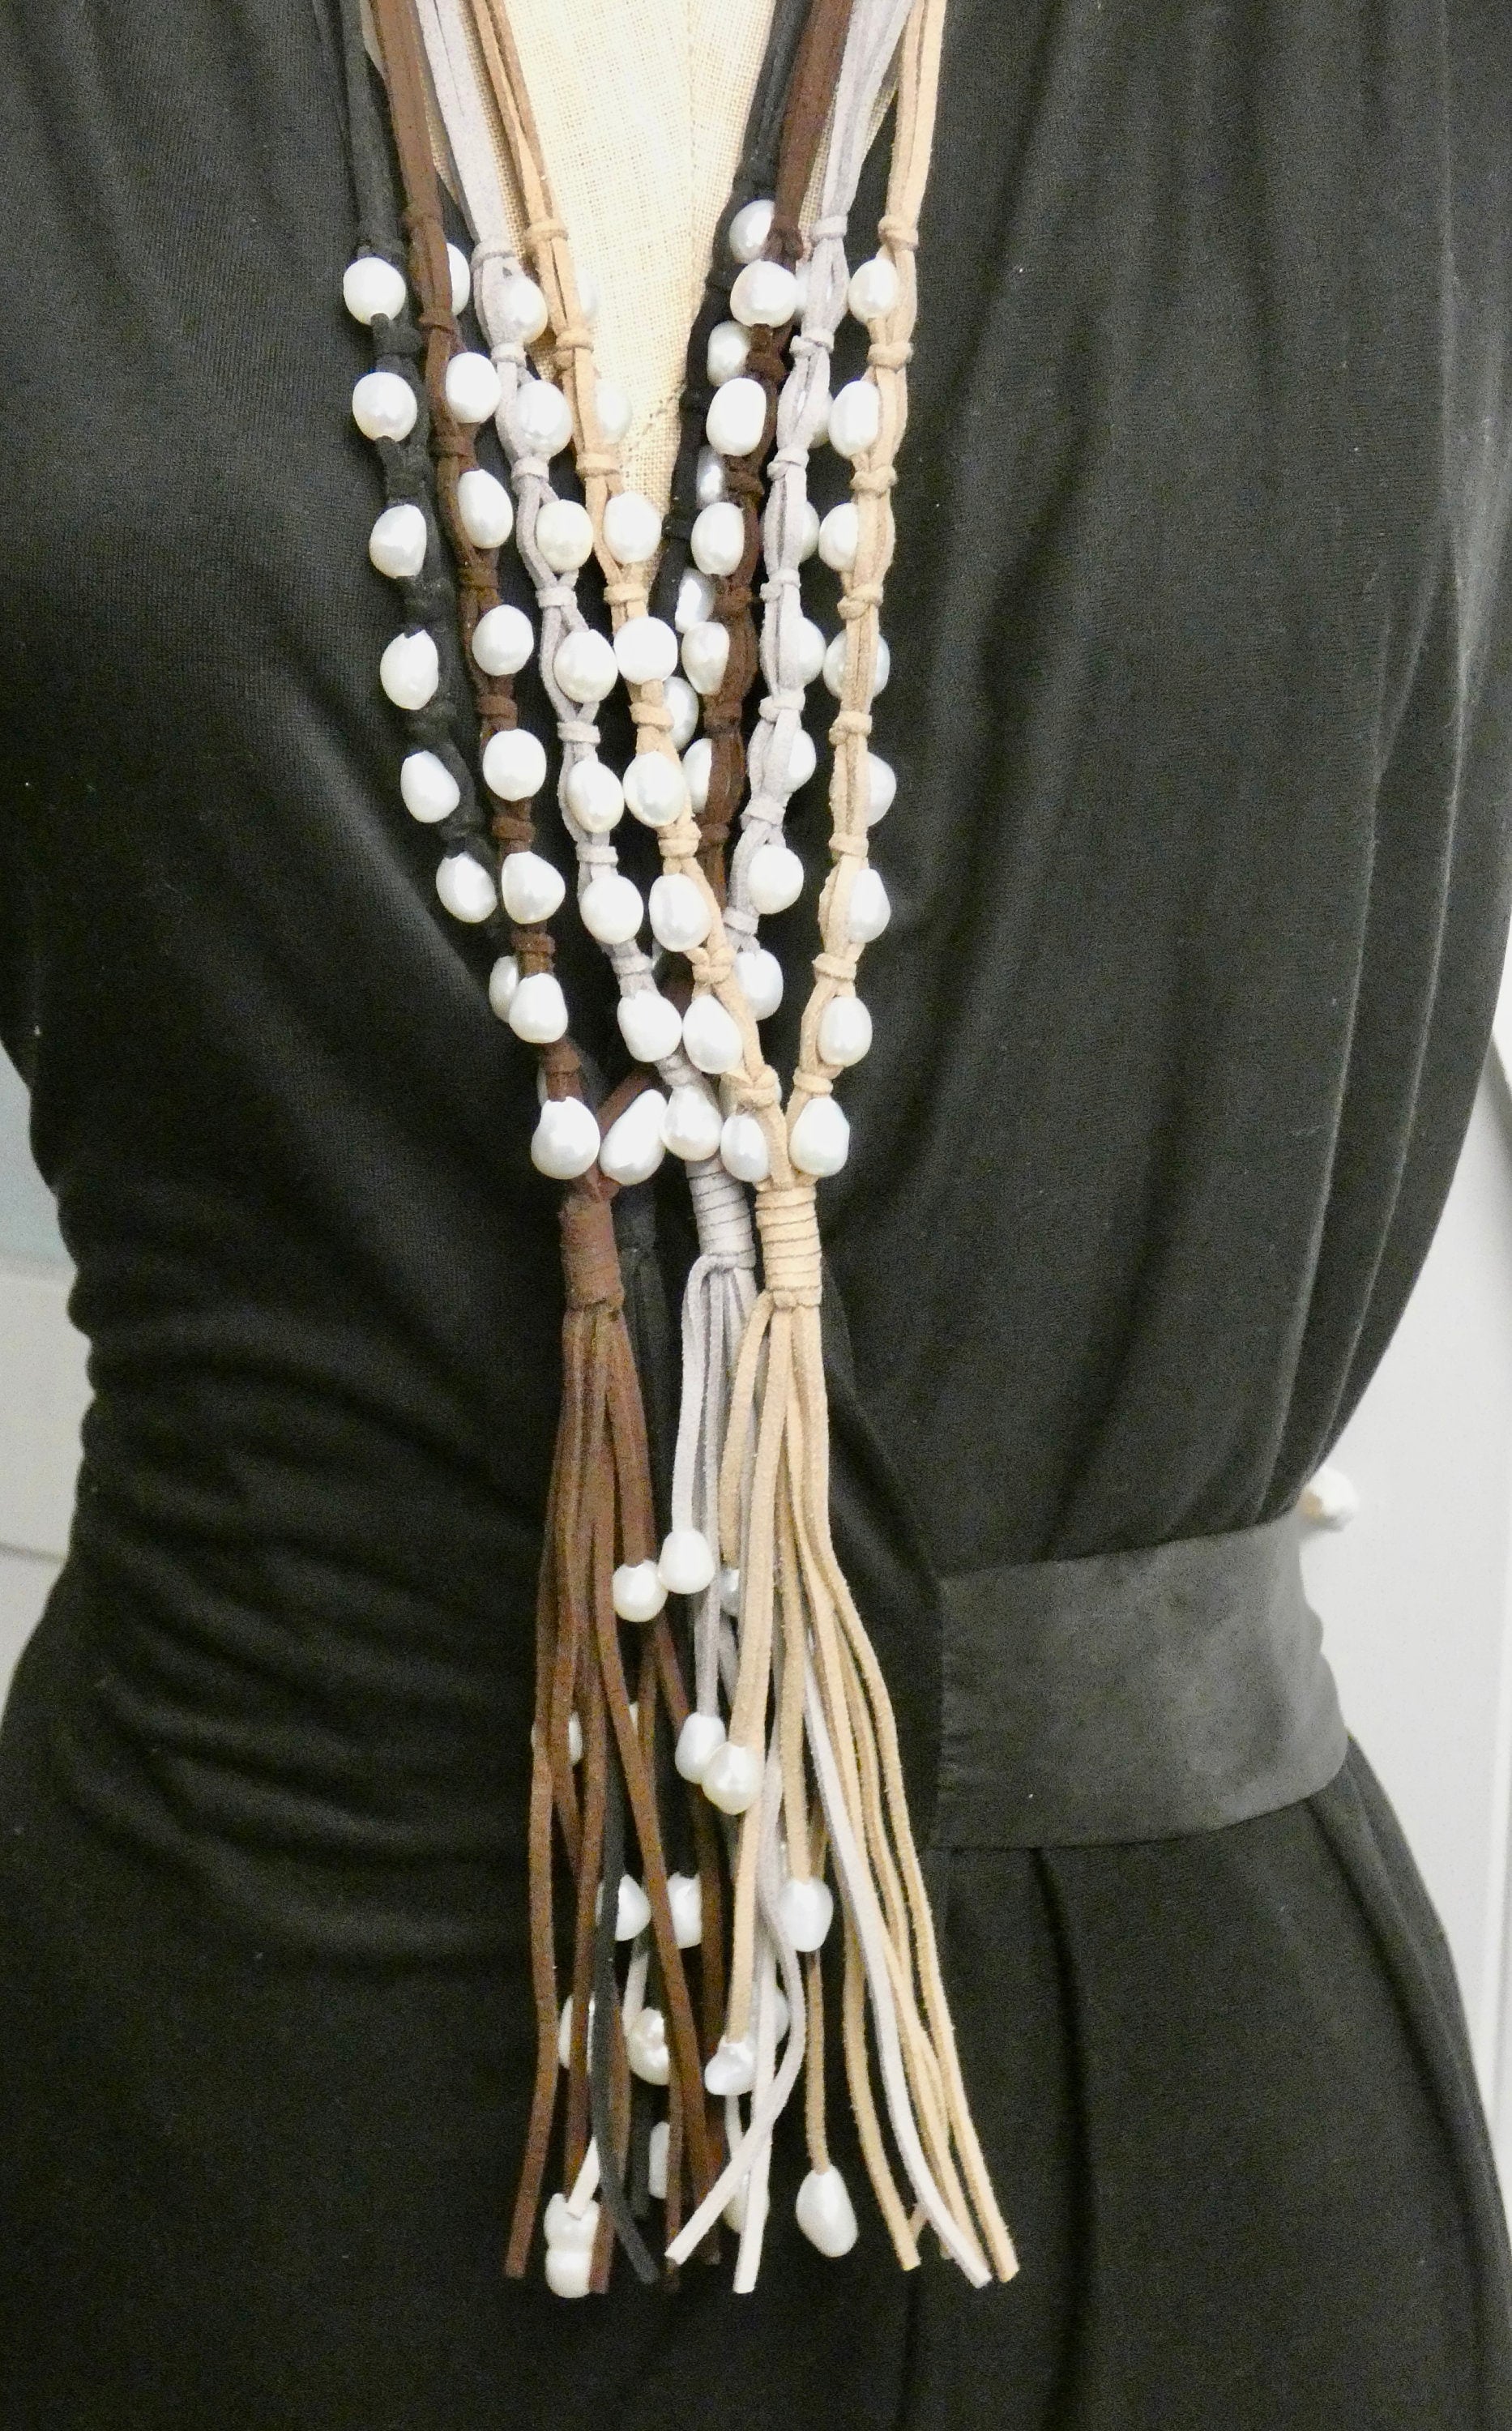 Pearl and Leather Necklace, suede tassel hand knotted long pendant, small size freshwater pearls